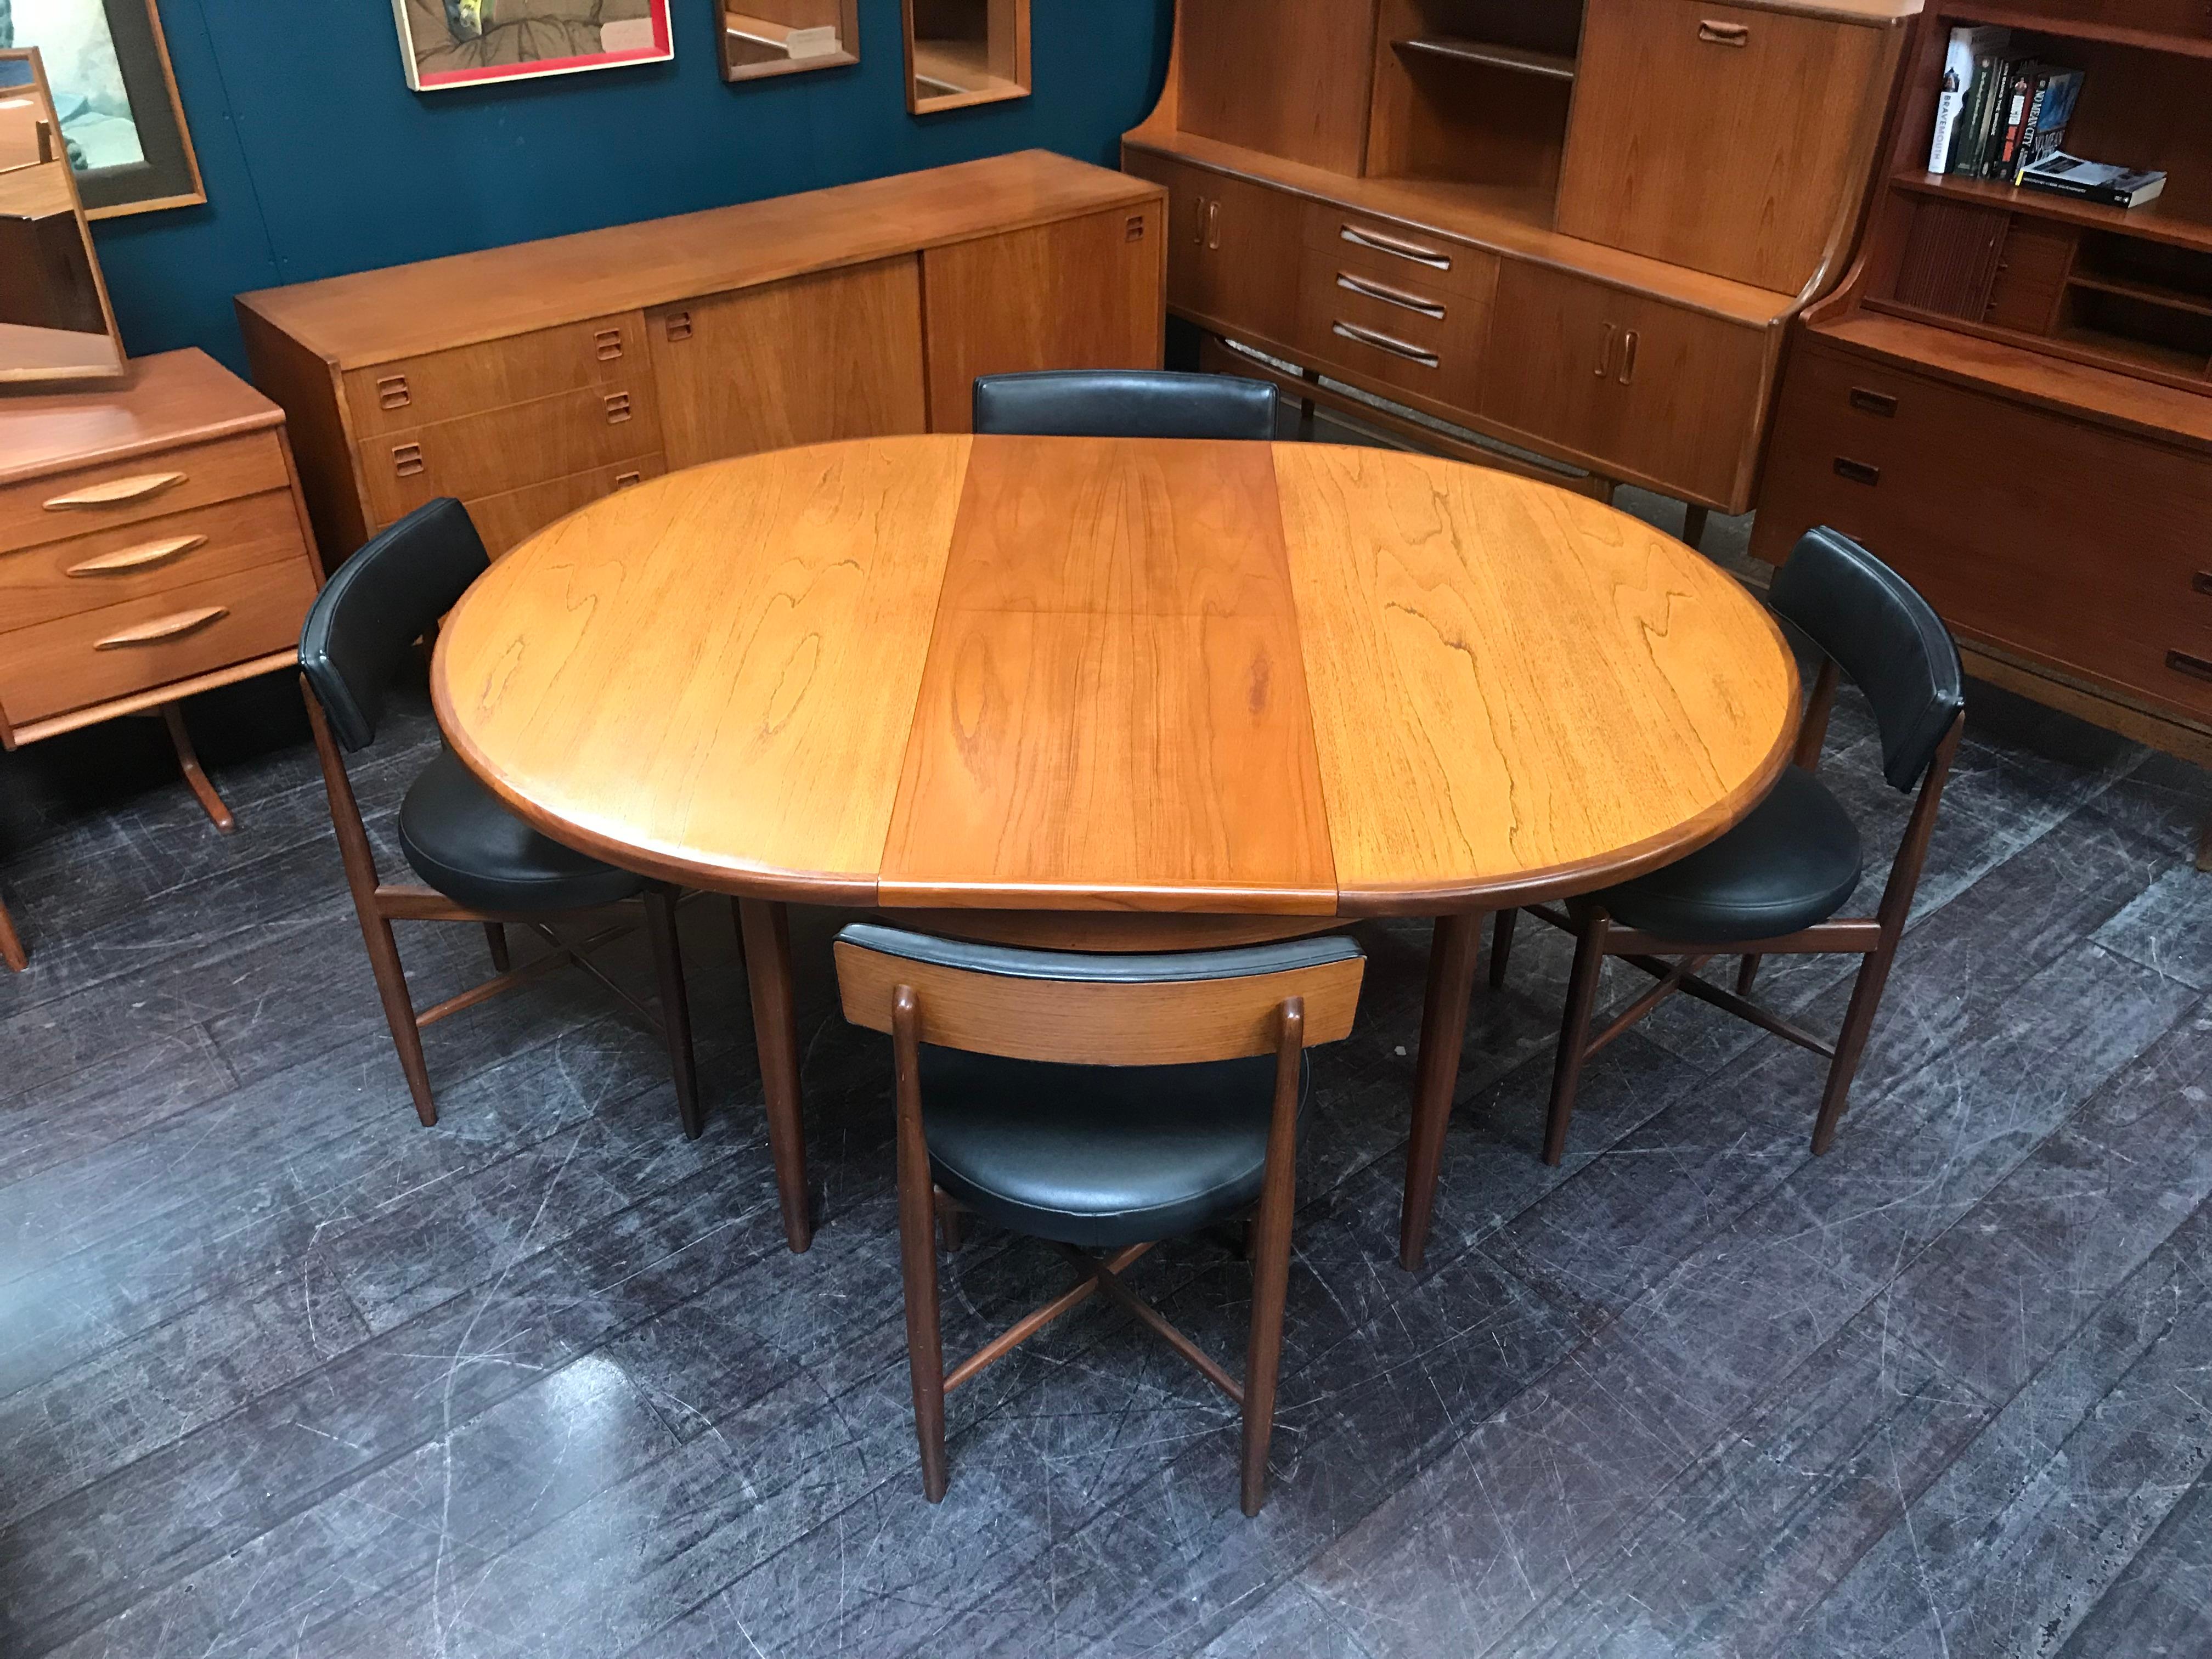 British Midcentury Teak Dining Table G Plan with 4 Chairs by Ib Kofod-Larsen For Sale 2